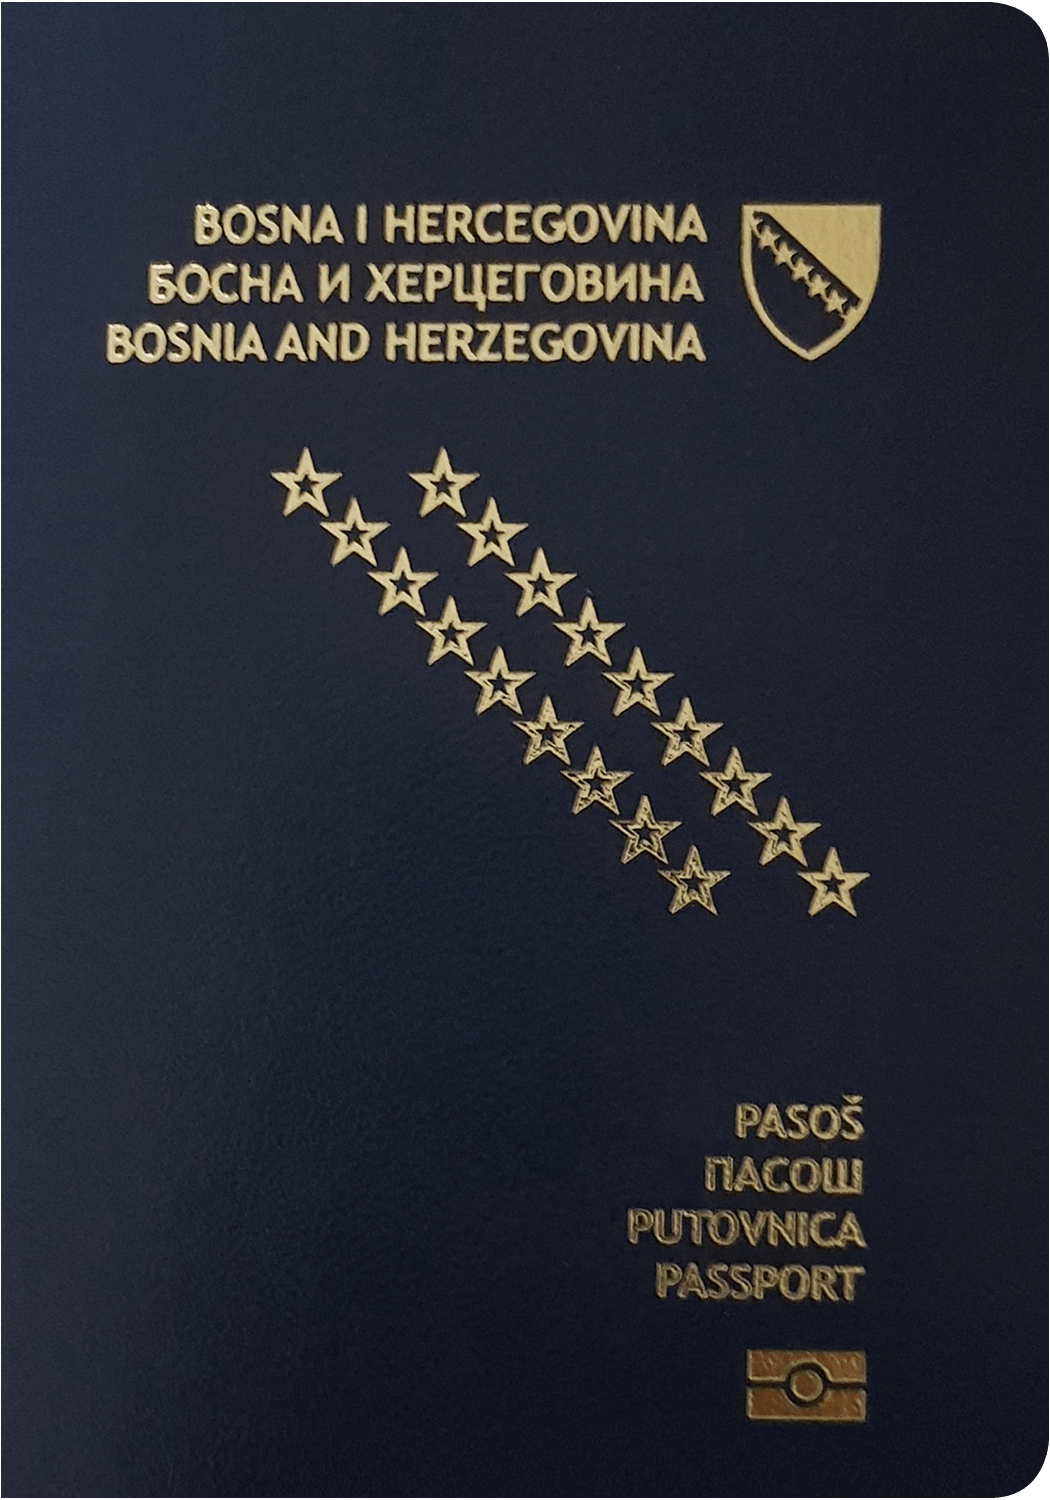 The image of the passport of Bosnia and Herzegovina